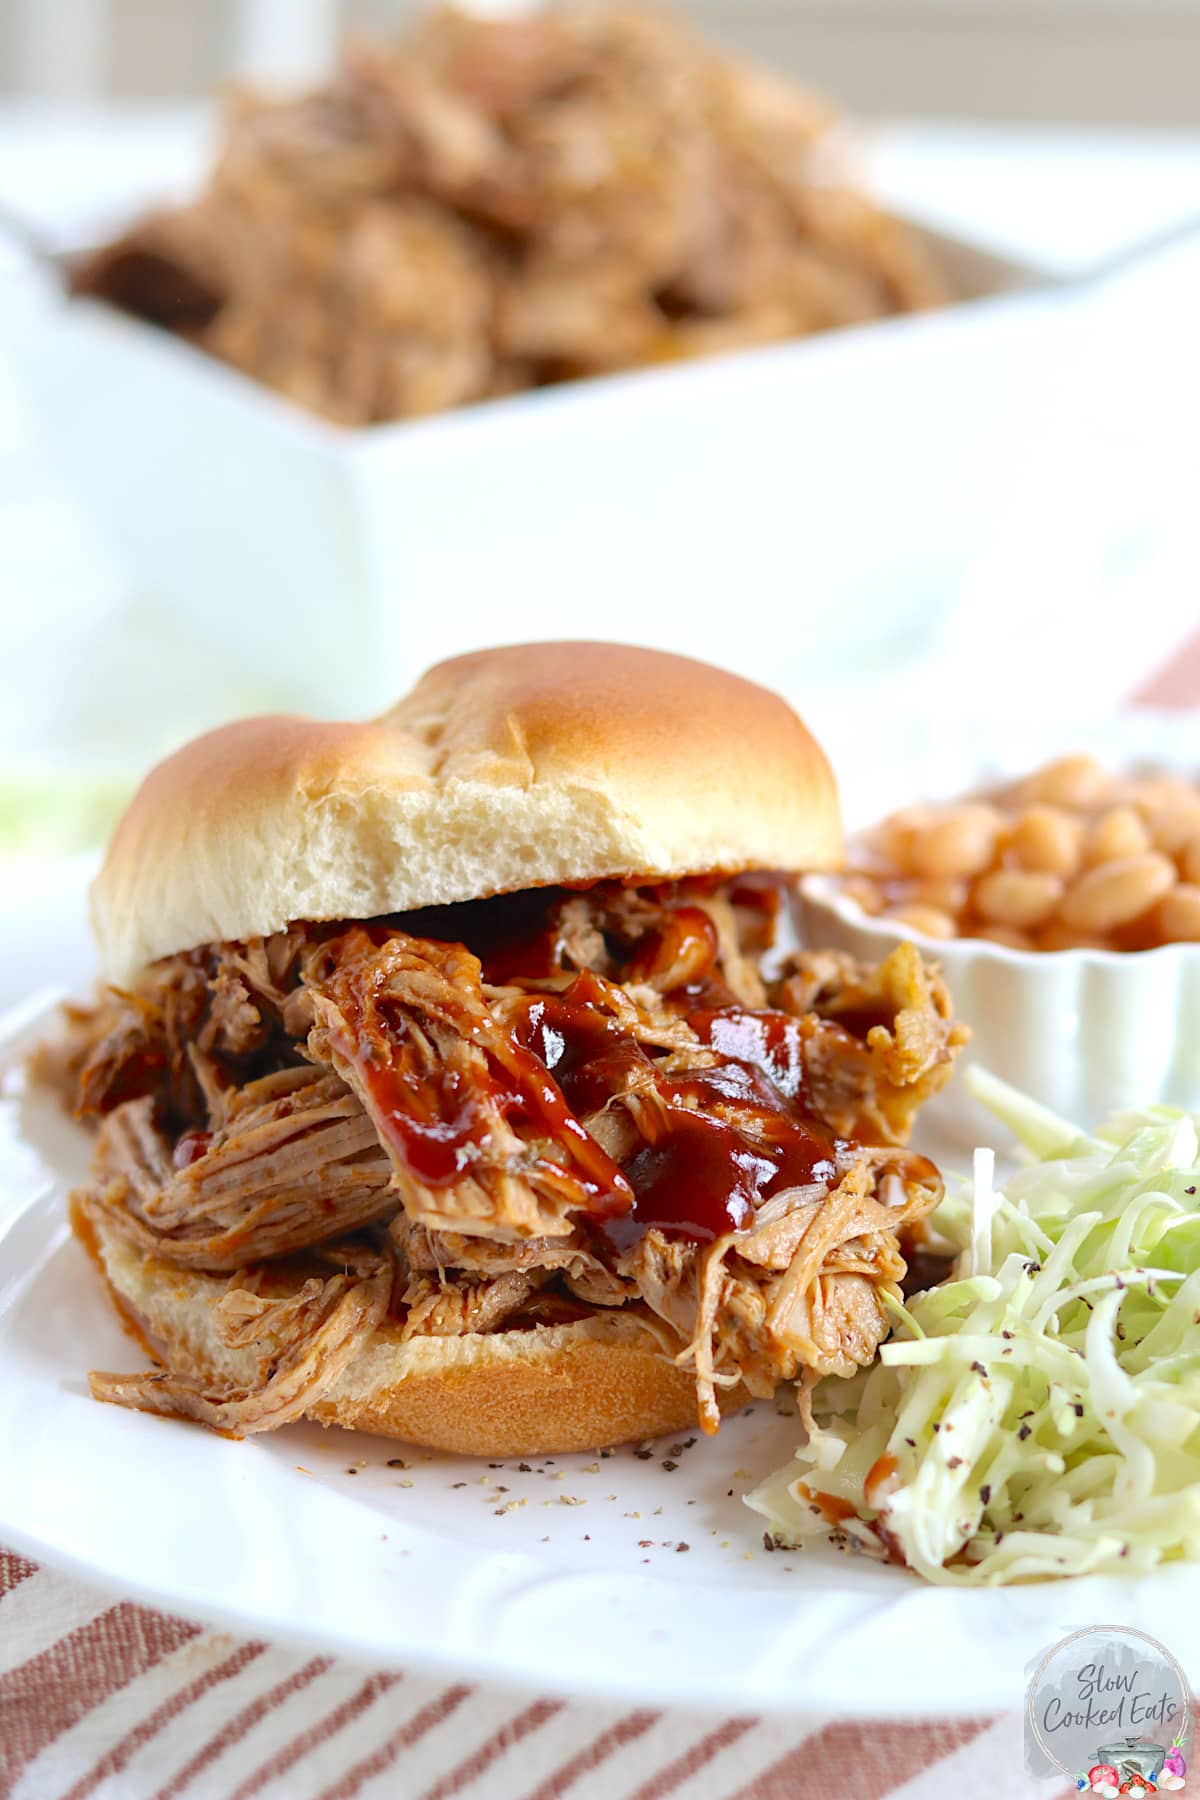 Dr. Pepper pulled pork served on a hamburger bun with bbq sauce, coleslaw, and baked beans.